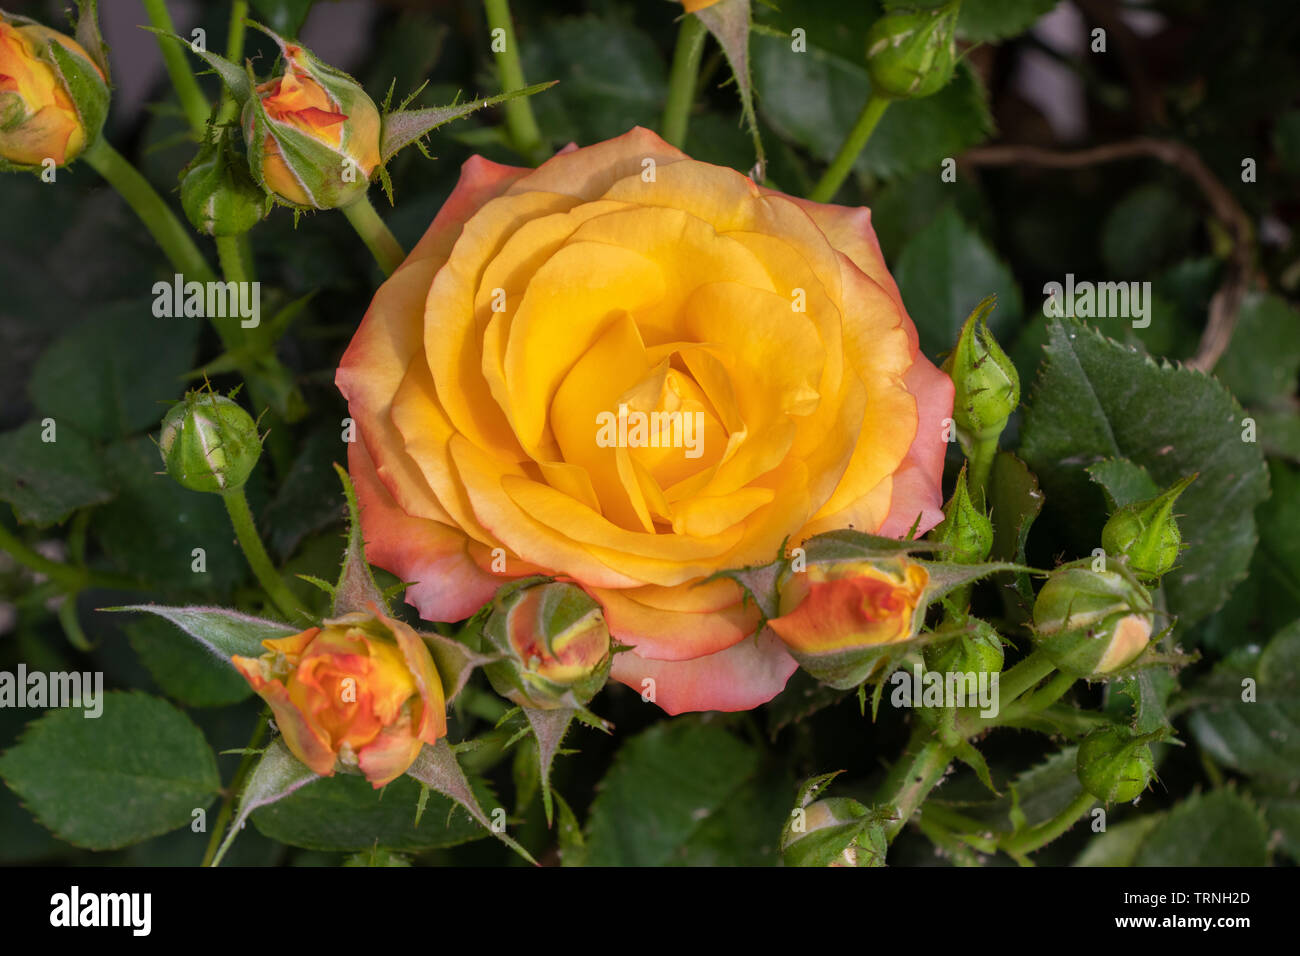 Yellow Rose Blooming With Rosebud In Garden Stock Photo Alamy